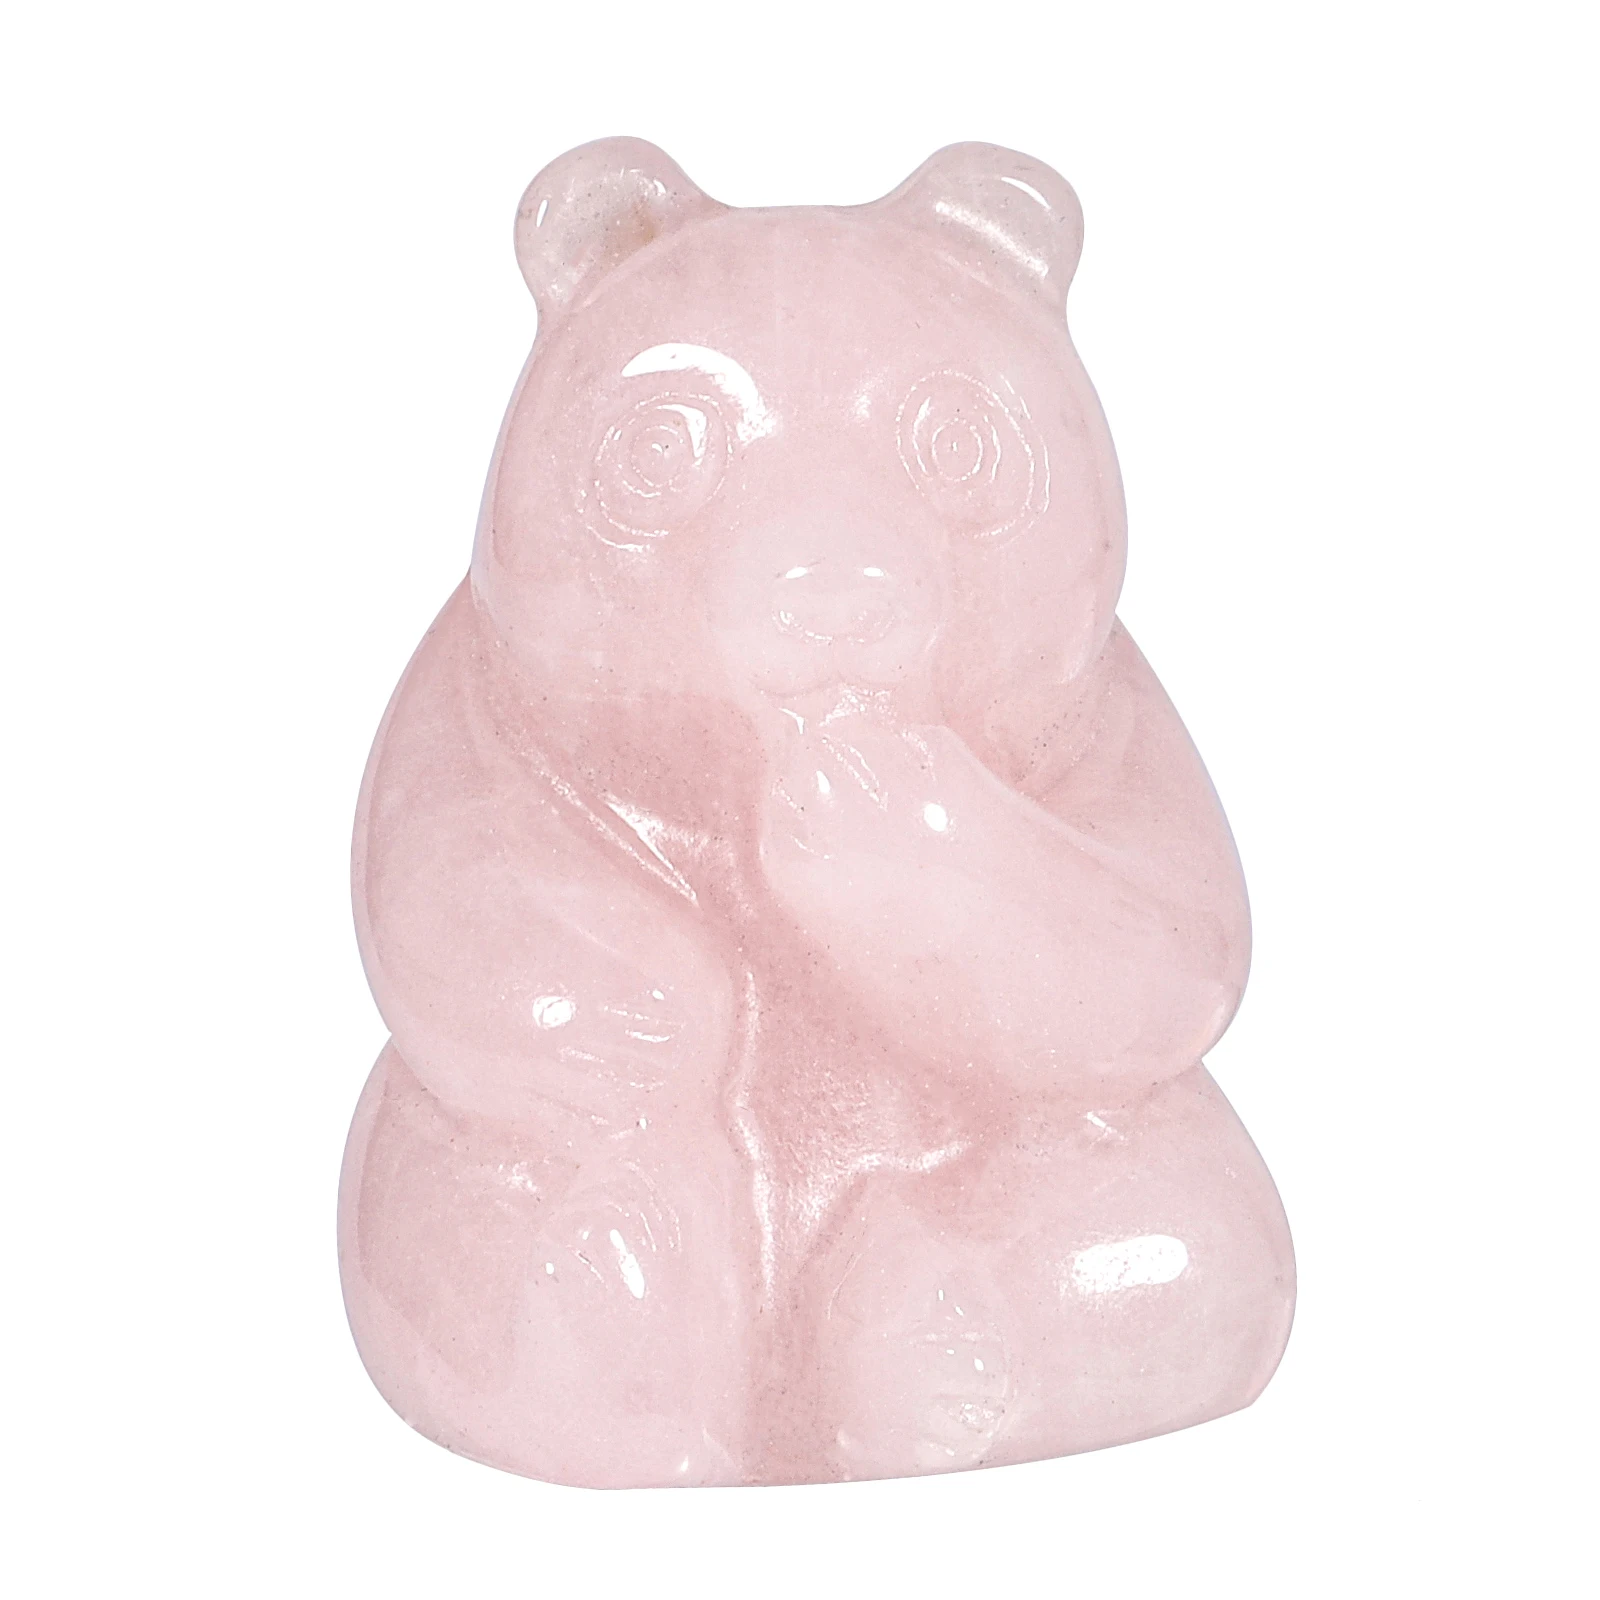 Natural Rose Quartz Bear Statue Healing Crystal Stone Hand-Carved Animal Figurines For Room Decor Home Small Ornaments